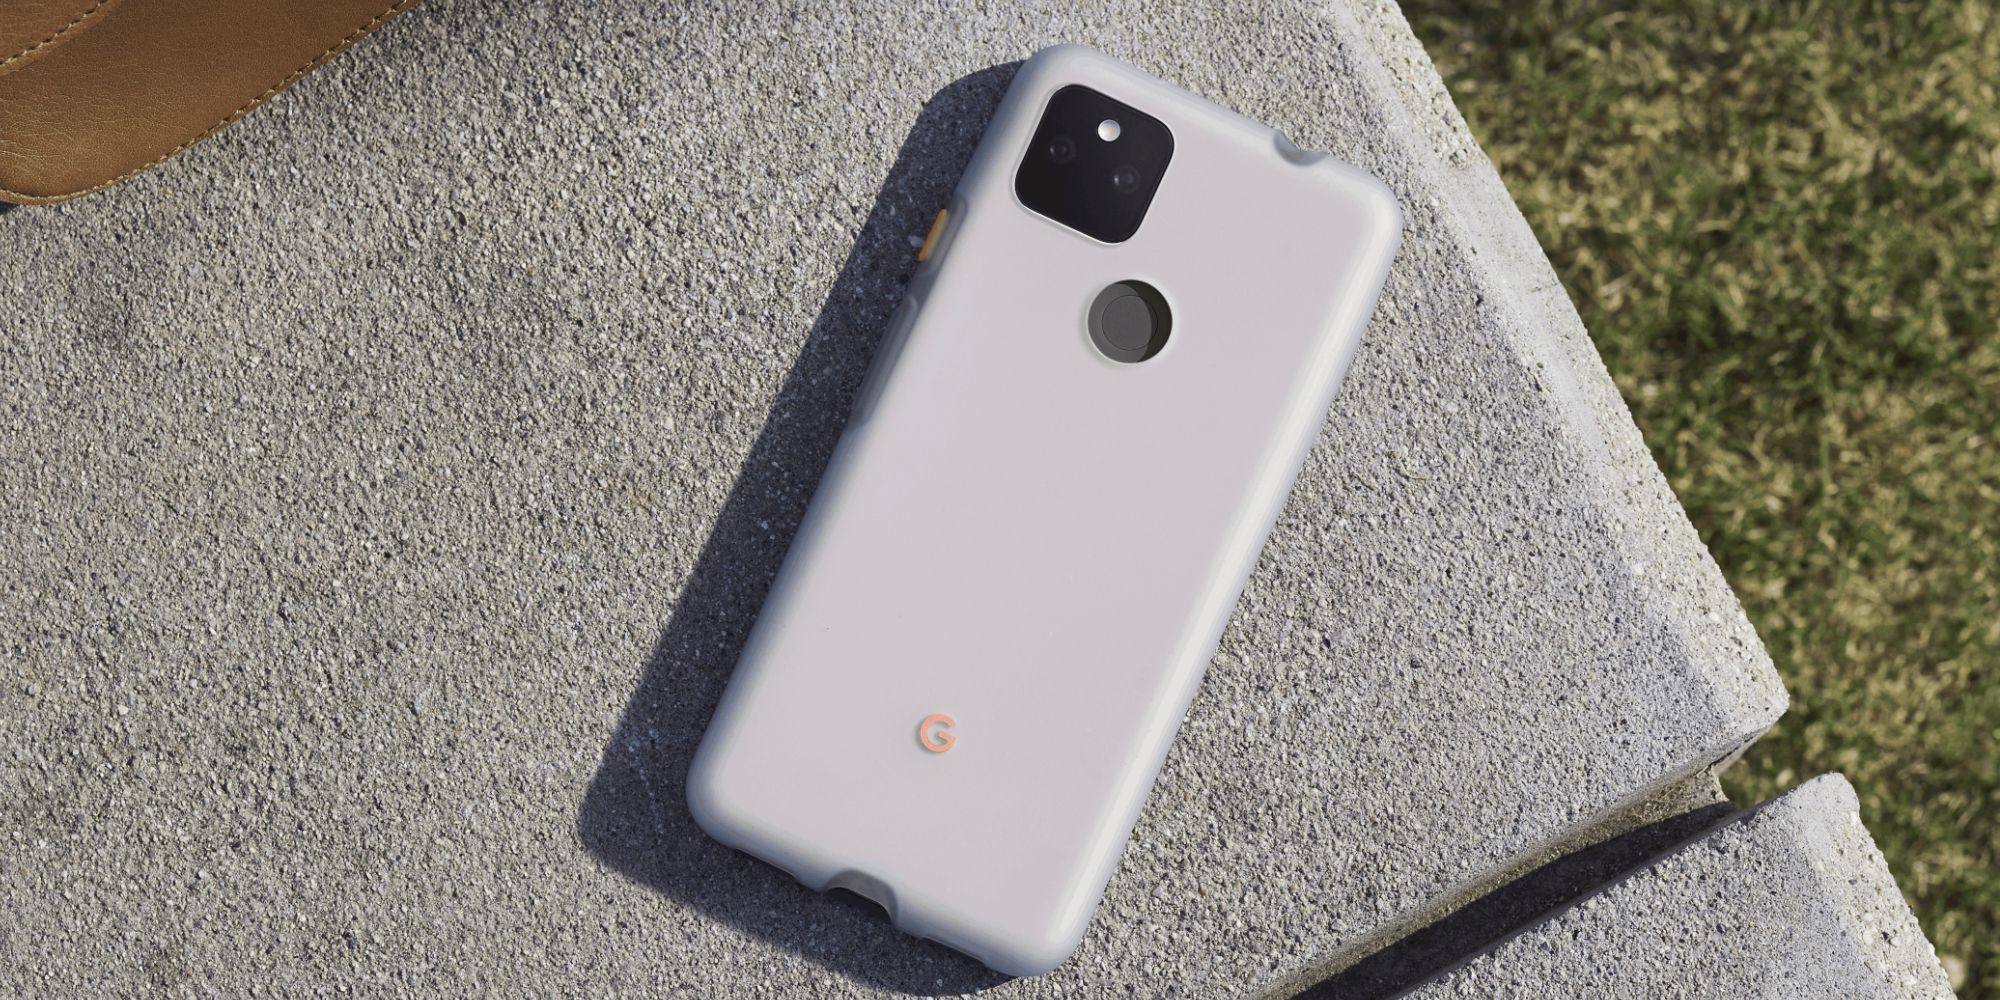 Where To Buy The Pixel 5a & How Much Does It Cost?